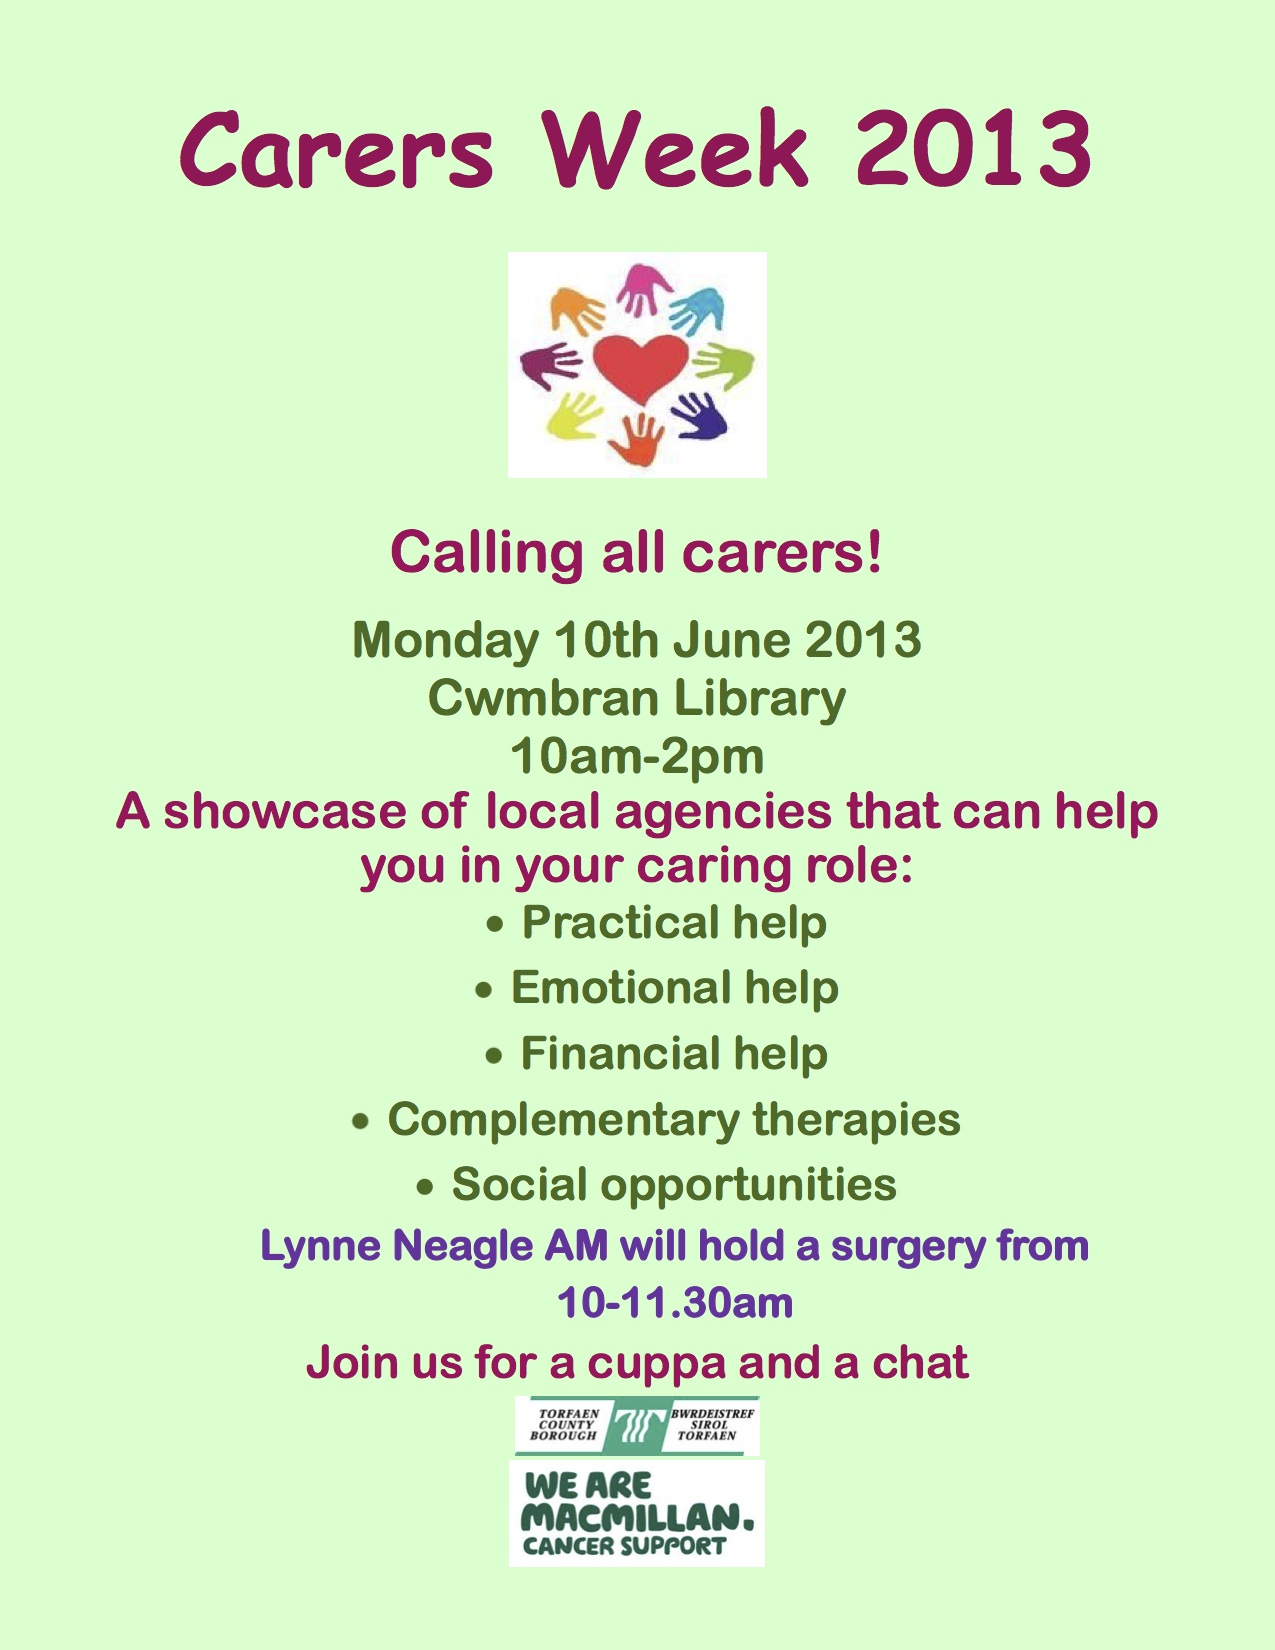 Carers event at Cwmbran Library